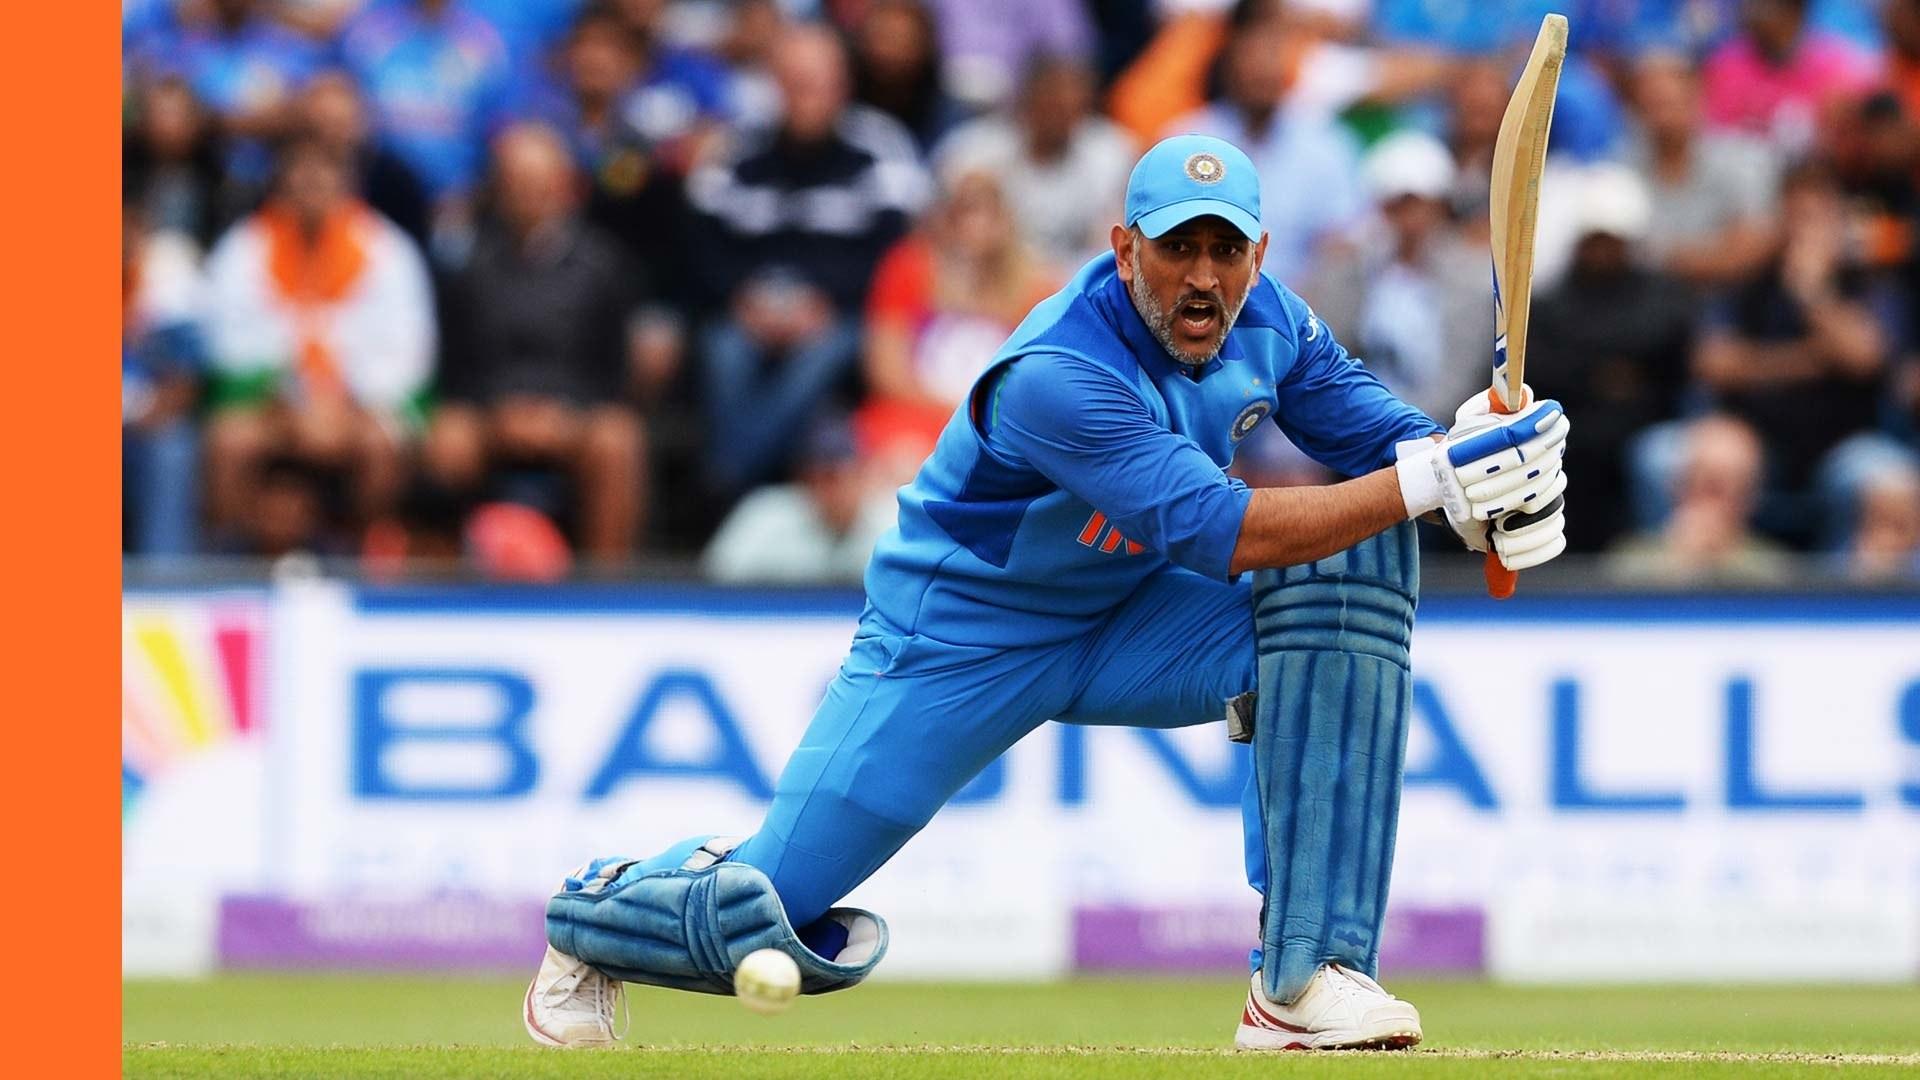 ICC Cricket World Cup 2019: MS Dhoni Is The Most Admired